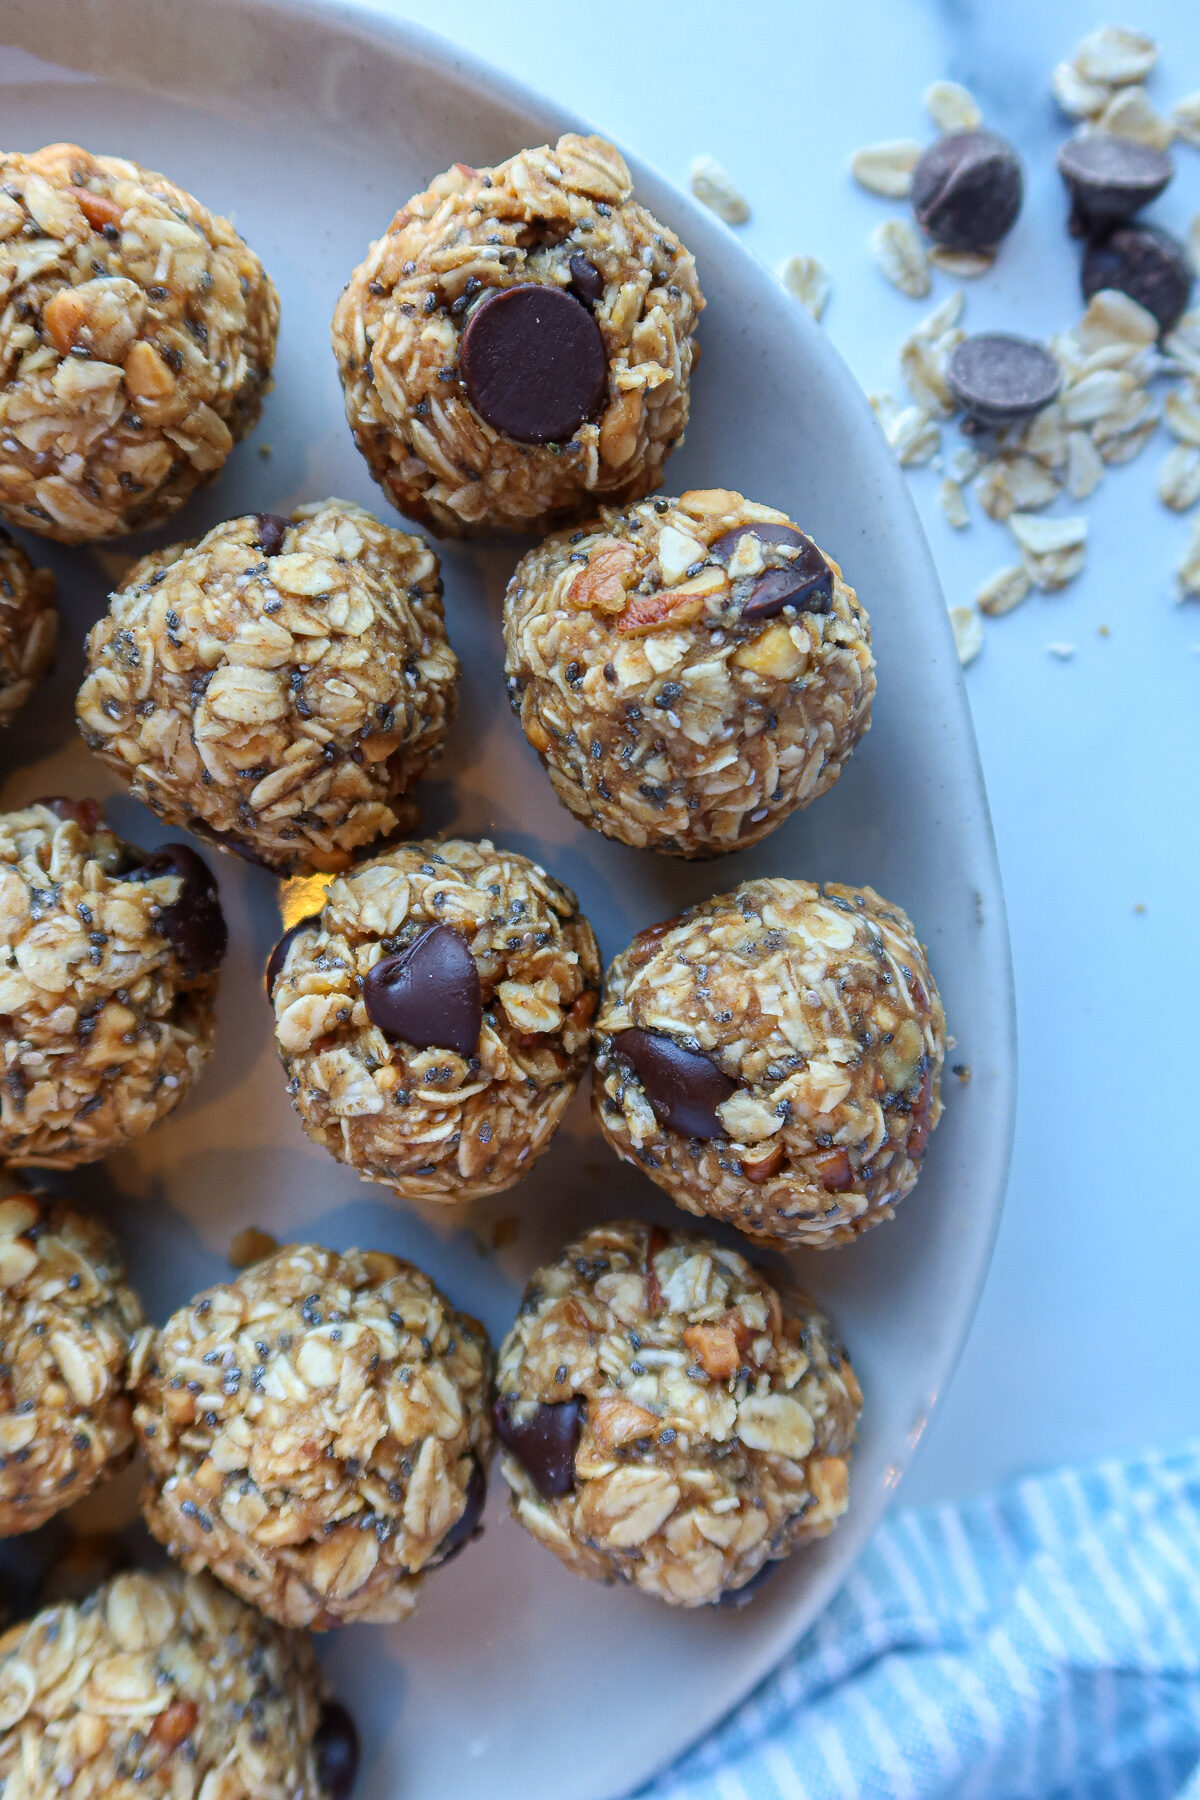 Peanut butter oatmeal balls on a white plate.